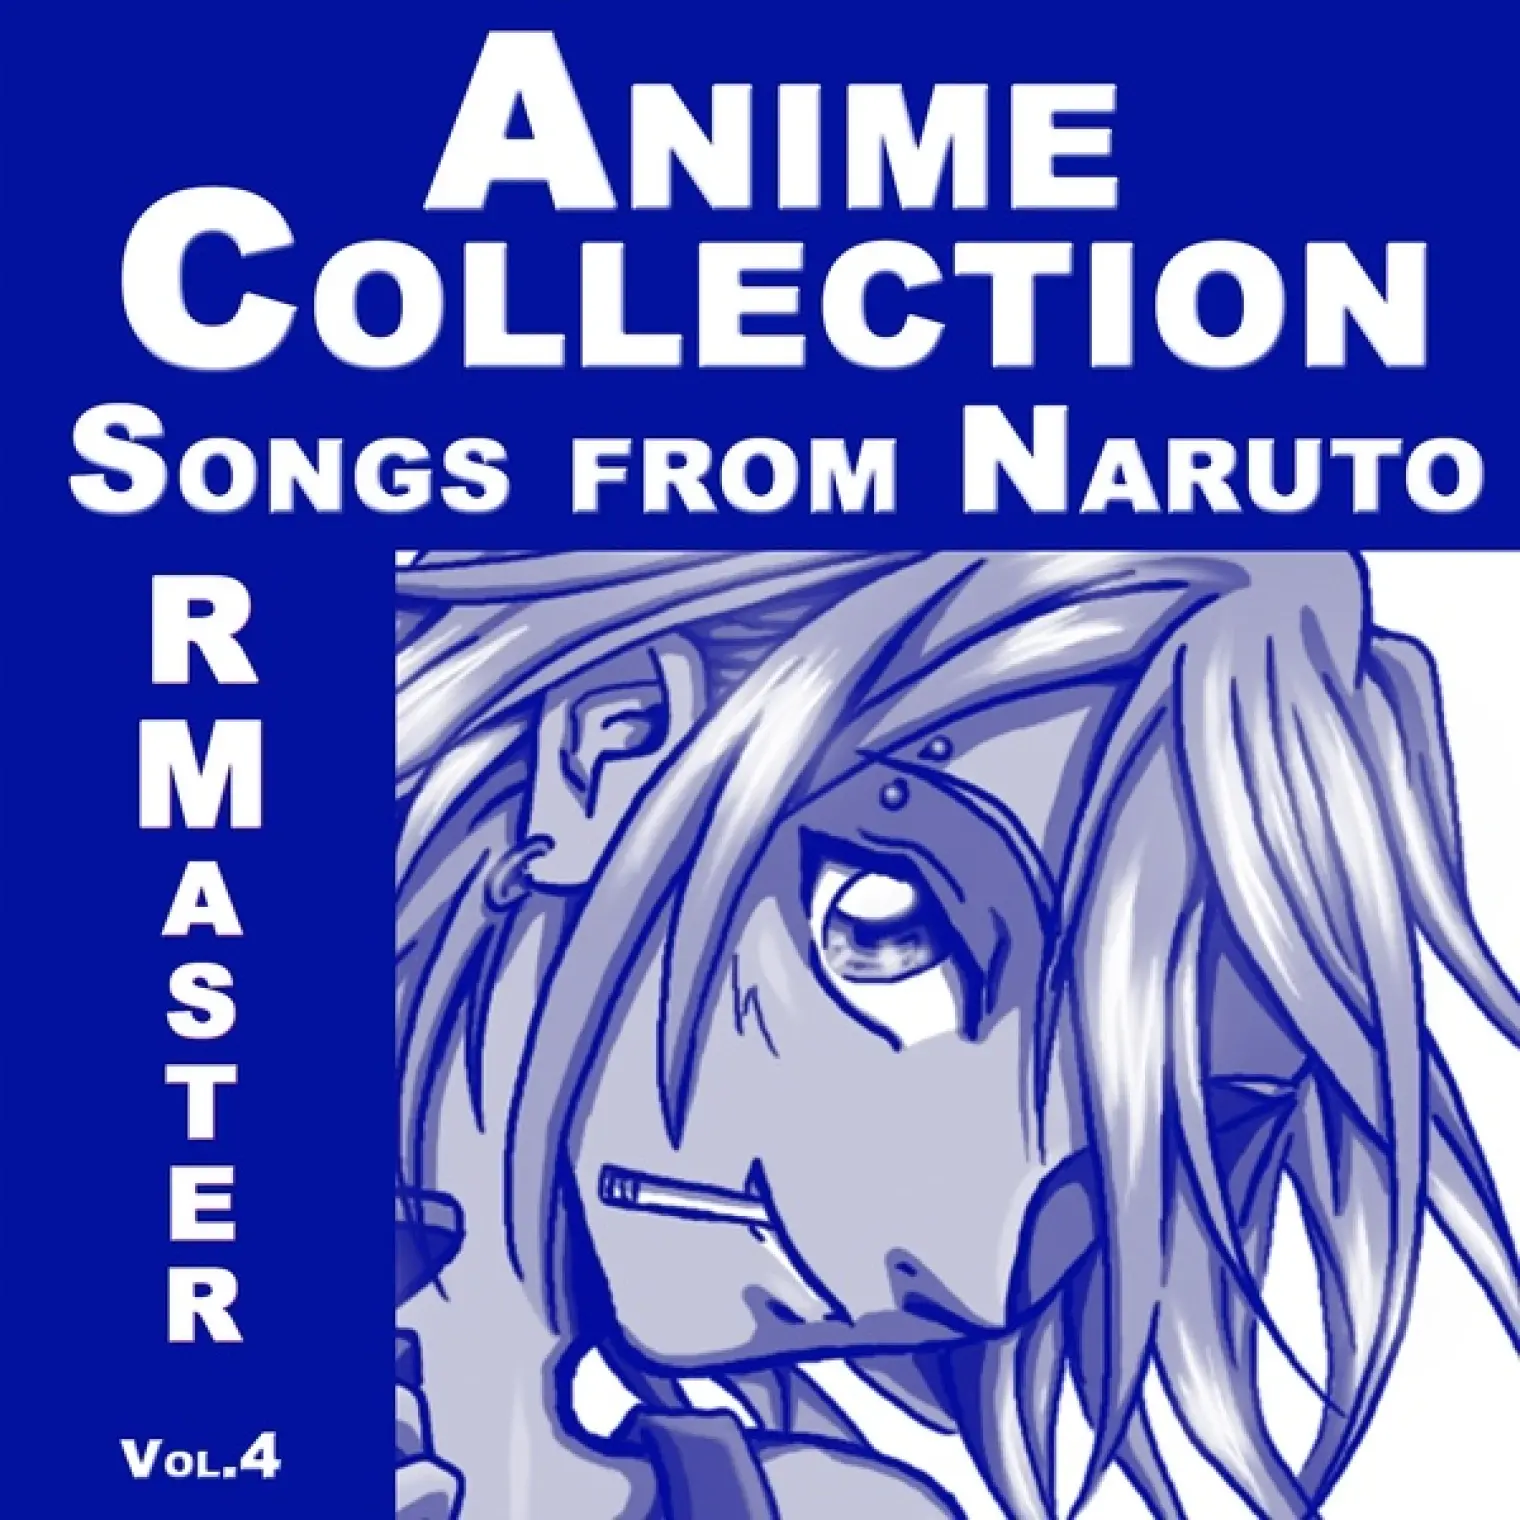 Anime Collection Naruto, Vol.4 (Songs from Naruto) -  RMaster 